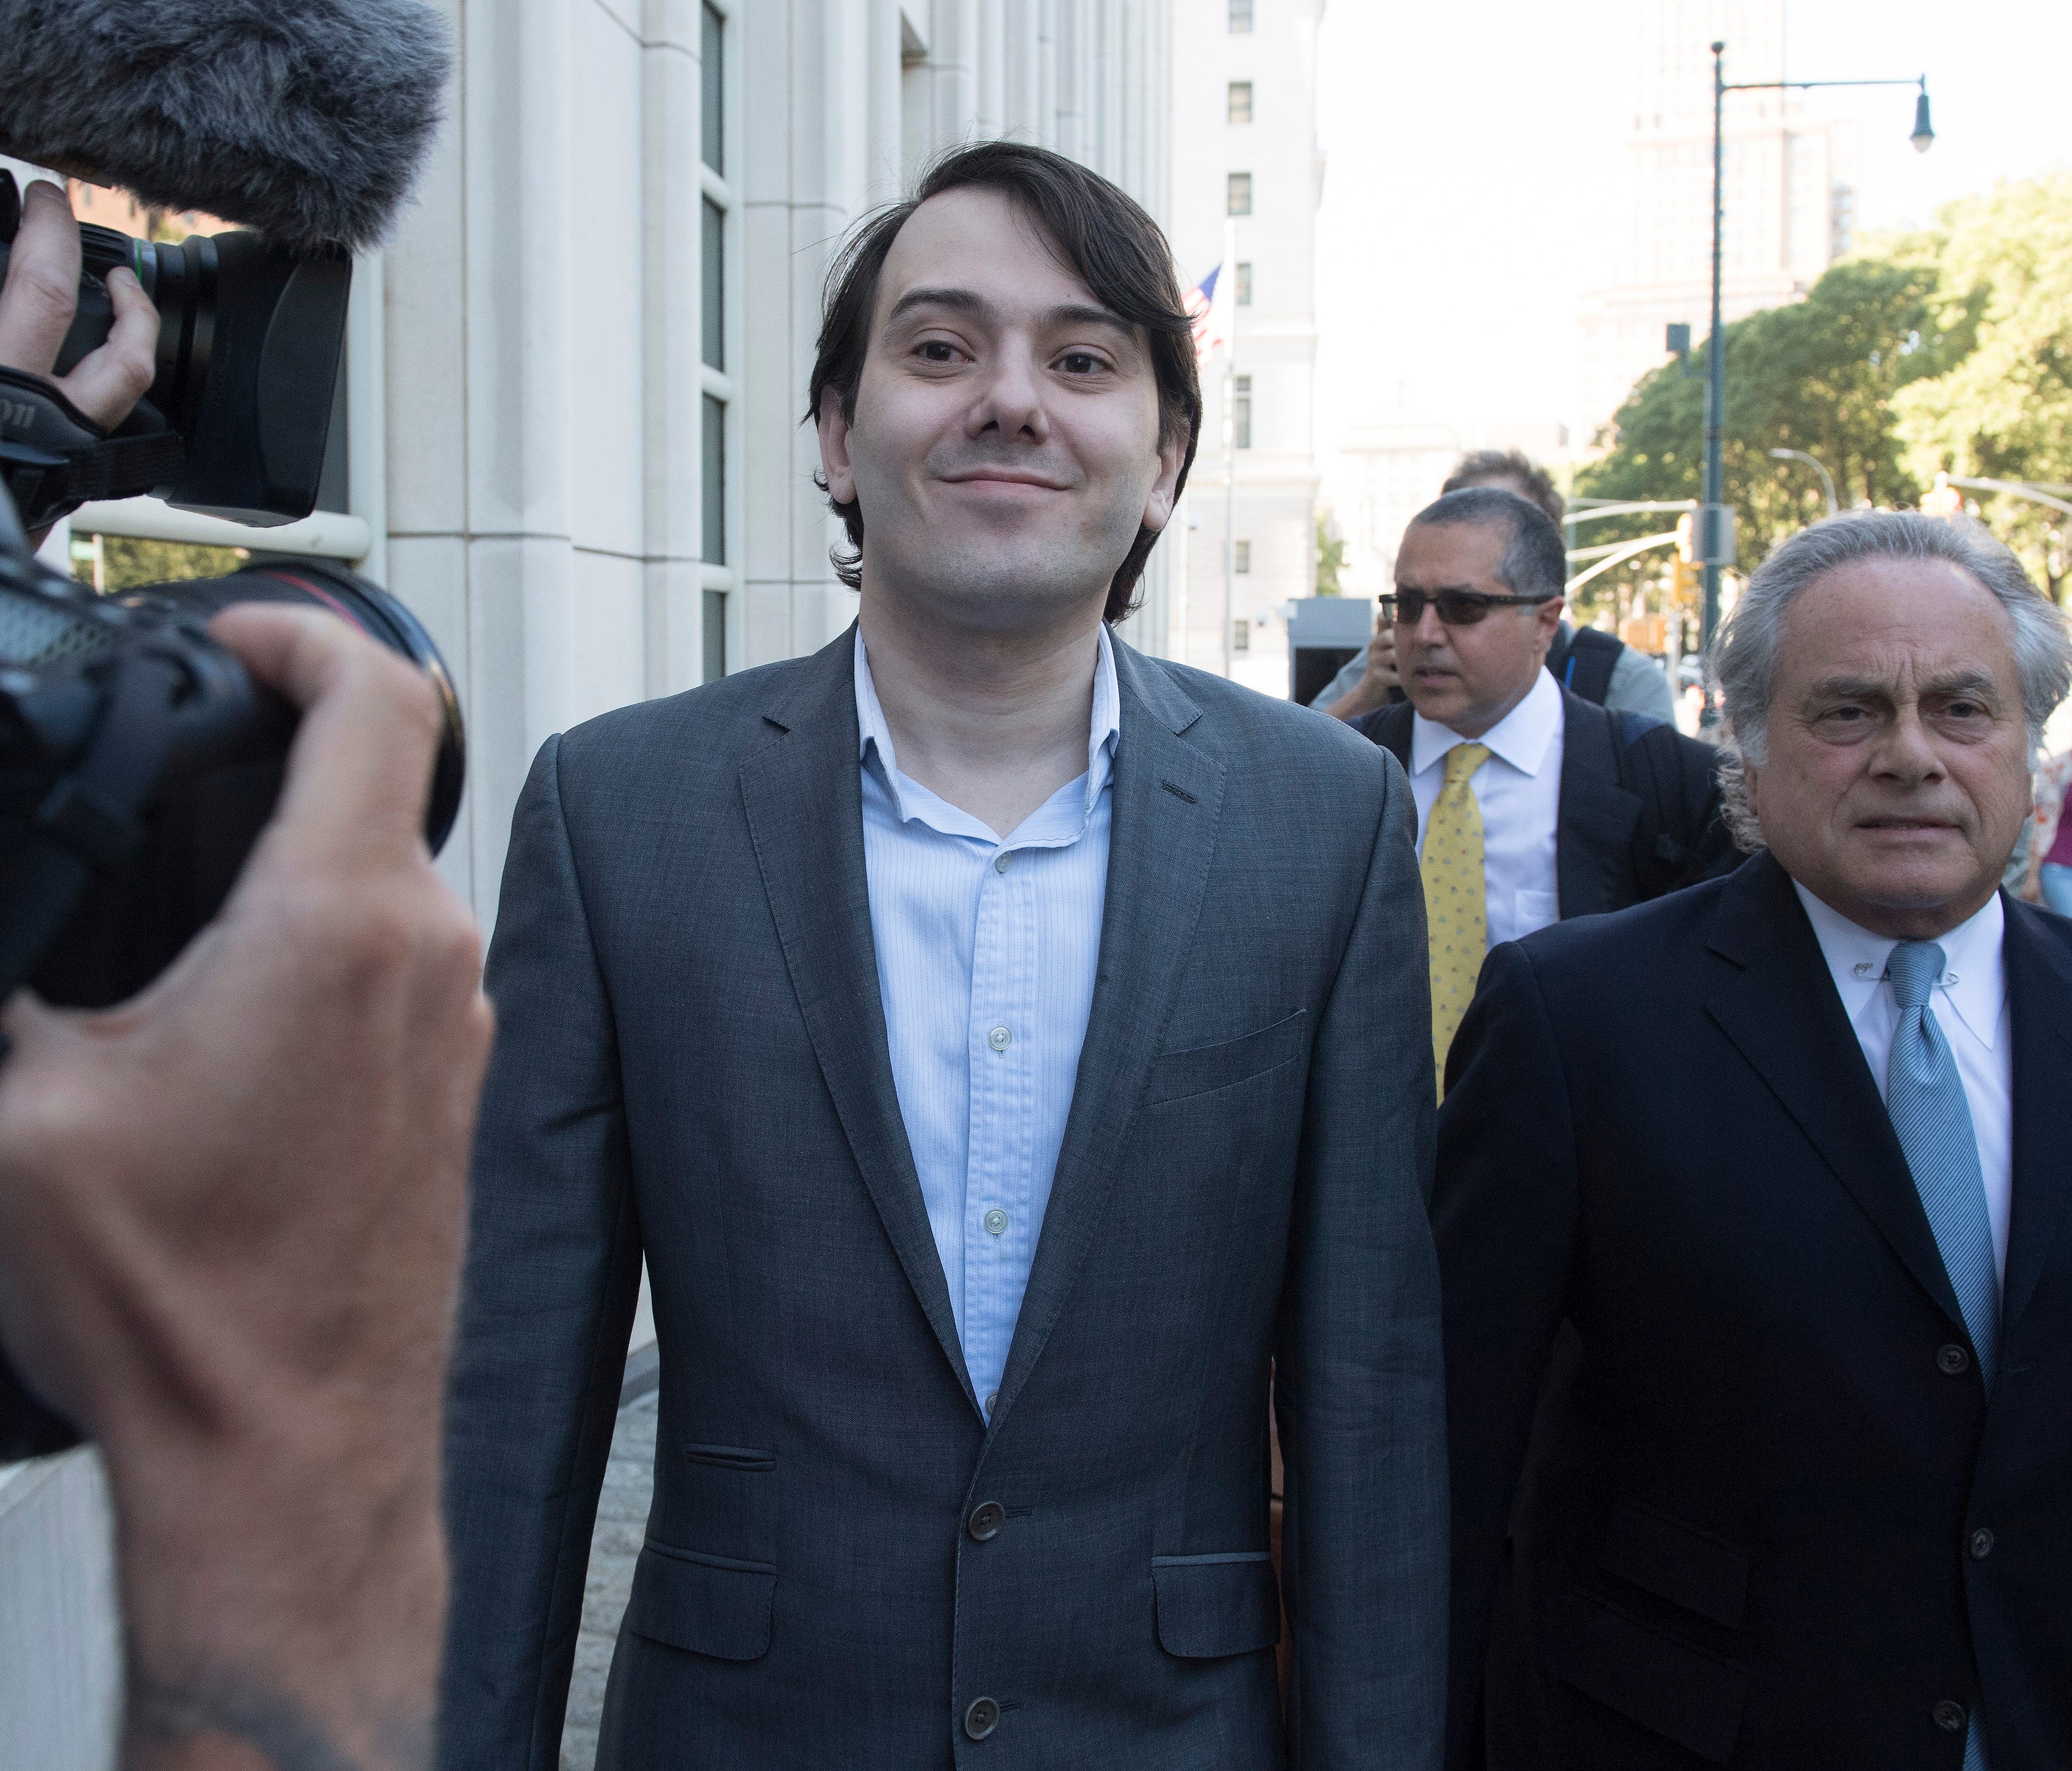 File photo shows pharmaceutical industry entrepreneur Martin Shkreli, center, arriving with defense lawyer Benjamin Brafman at Brooklyn federal court in New York City.